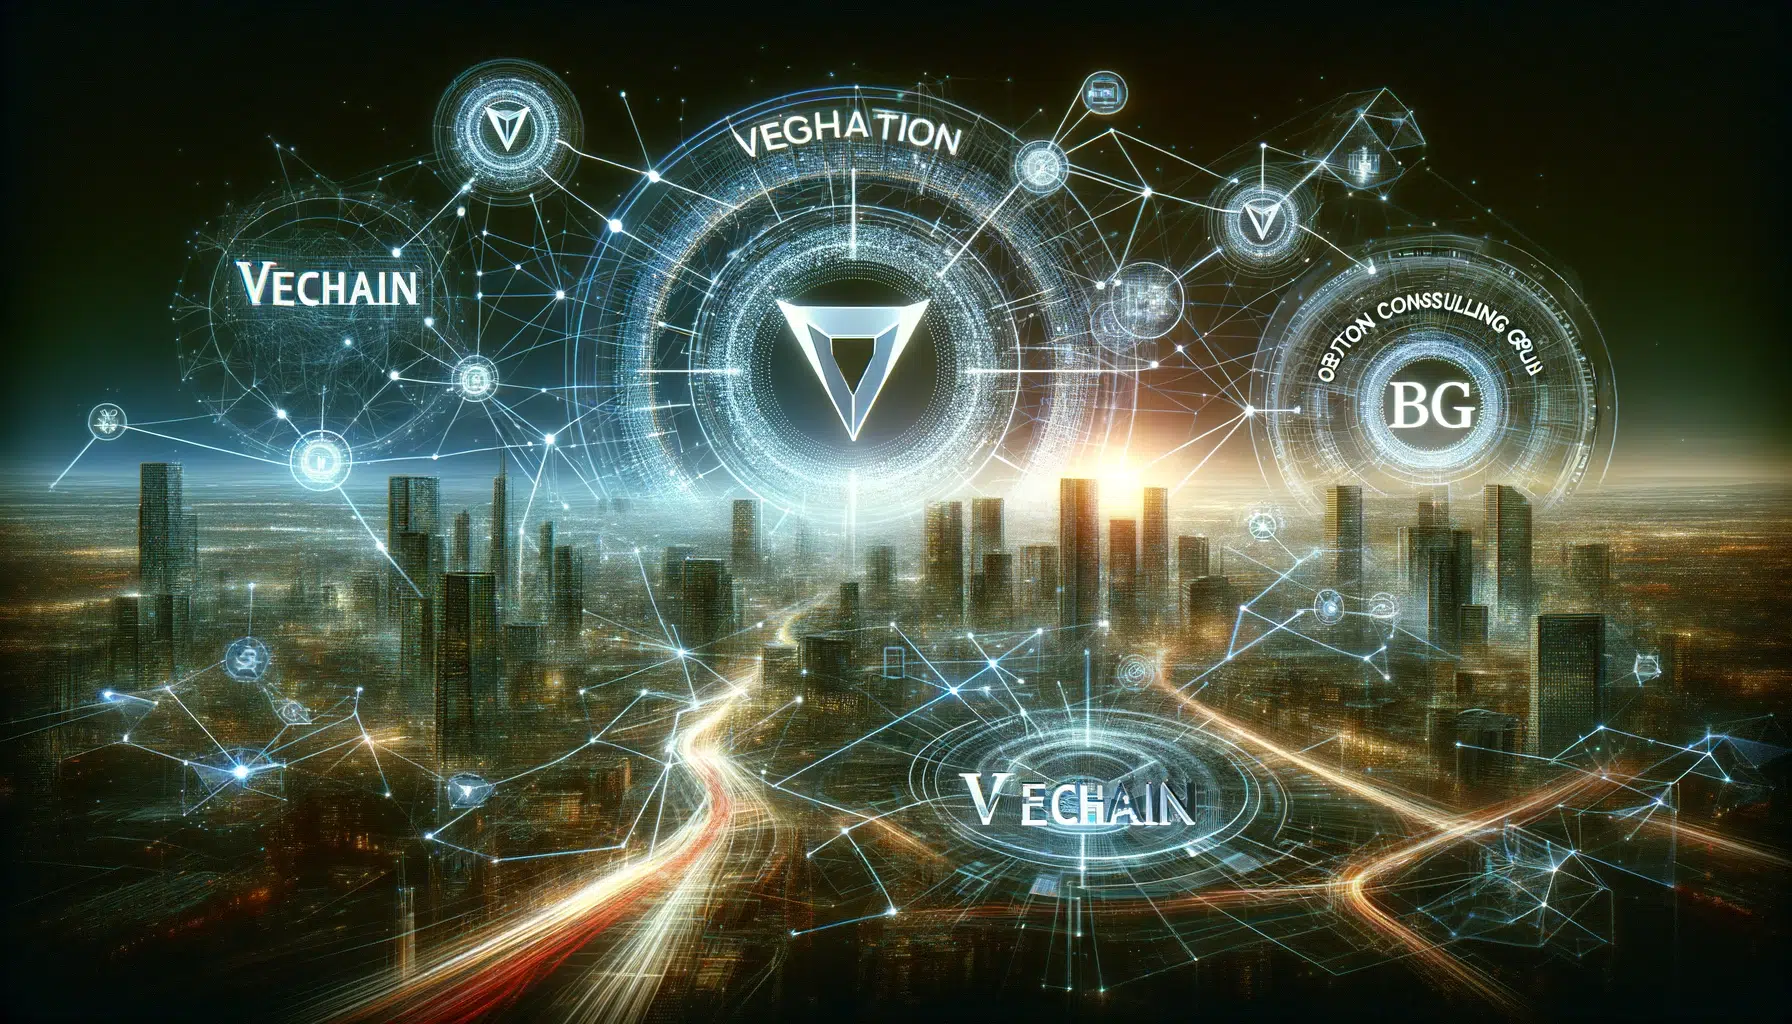 VeChain Accelerates with UFC Partnership and VeBetterDAO Initiatives